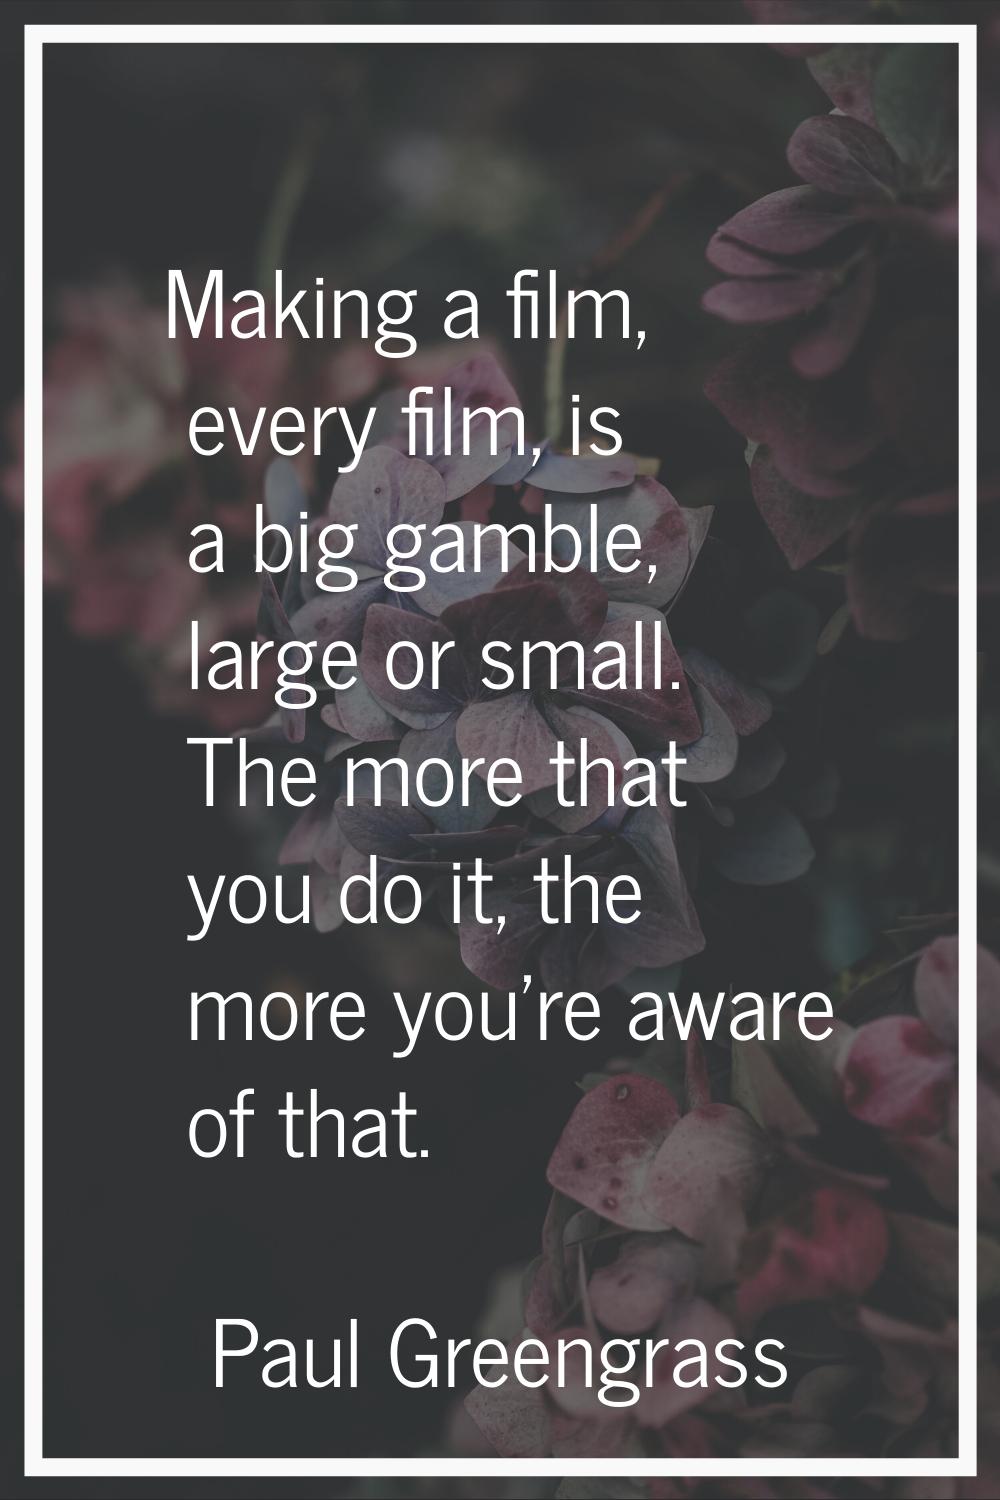 Making a film, every film, is a big gamble, large or small. The more that you do it, the more you'r